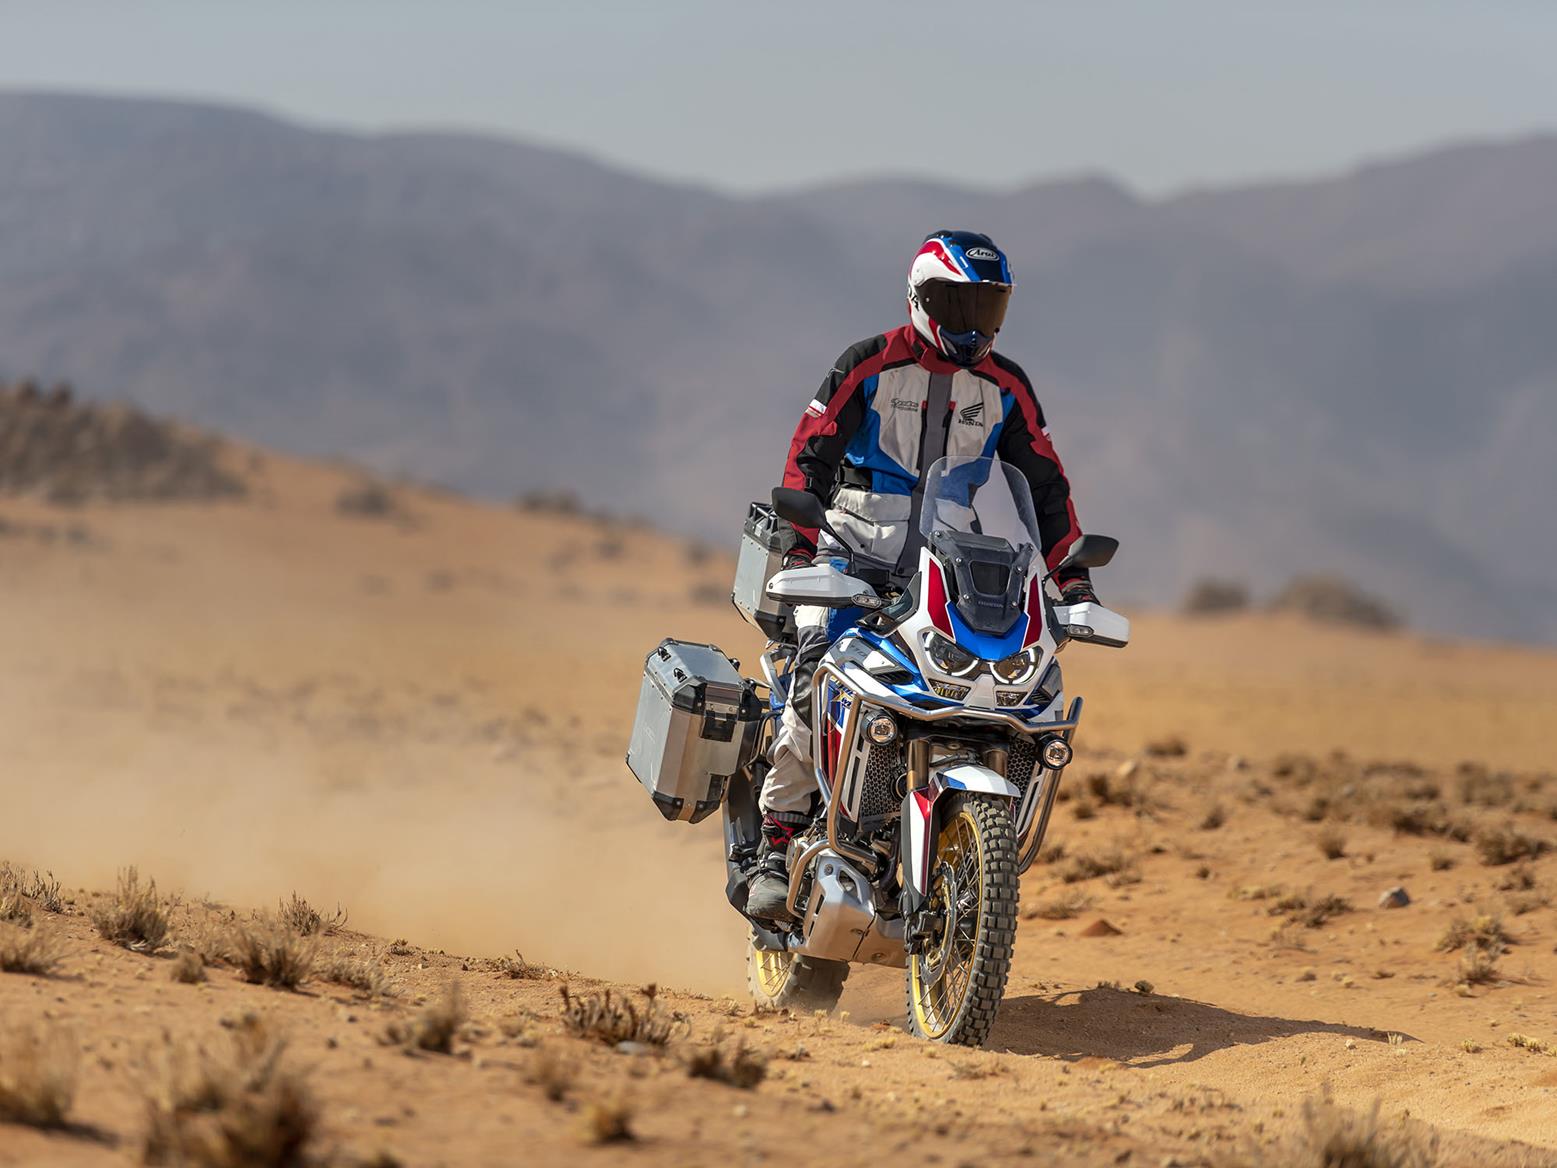 2020 Honda Africa Twin: the story